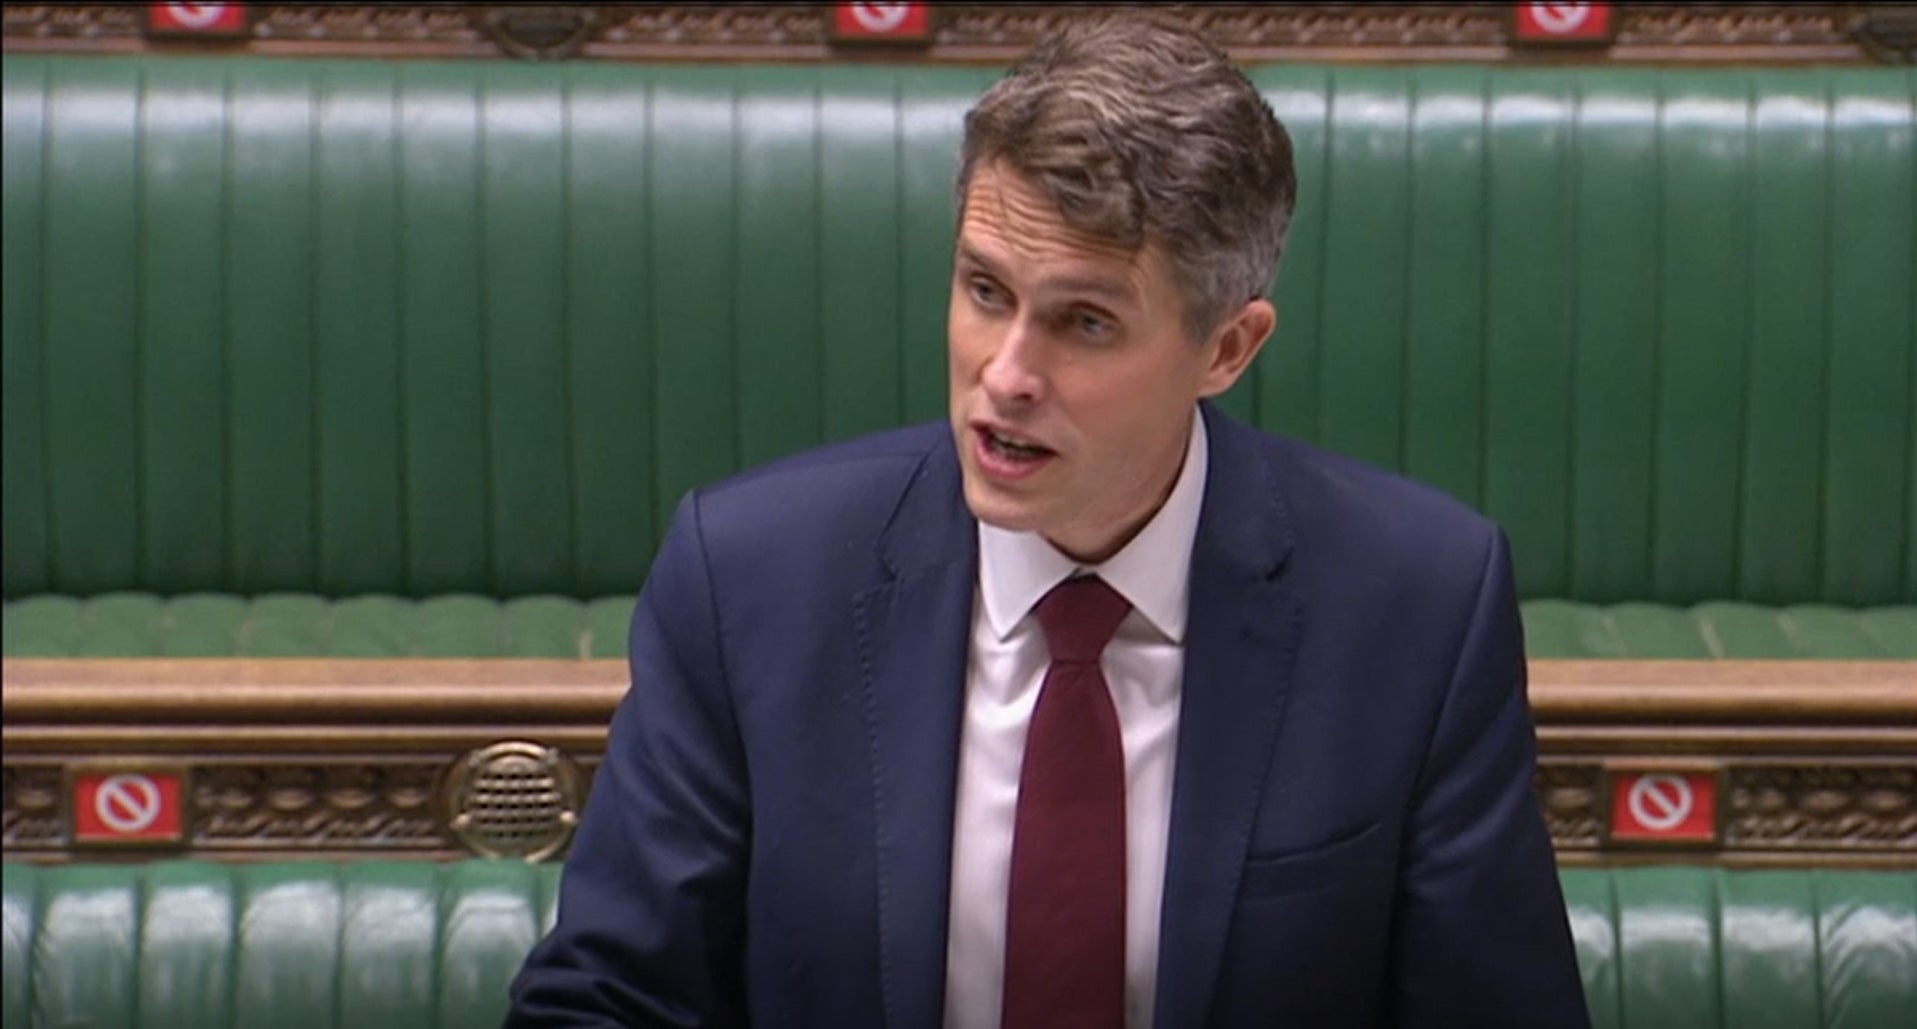 Gavin Williamson said a number of universities are ‘letting down all their staff and students'